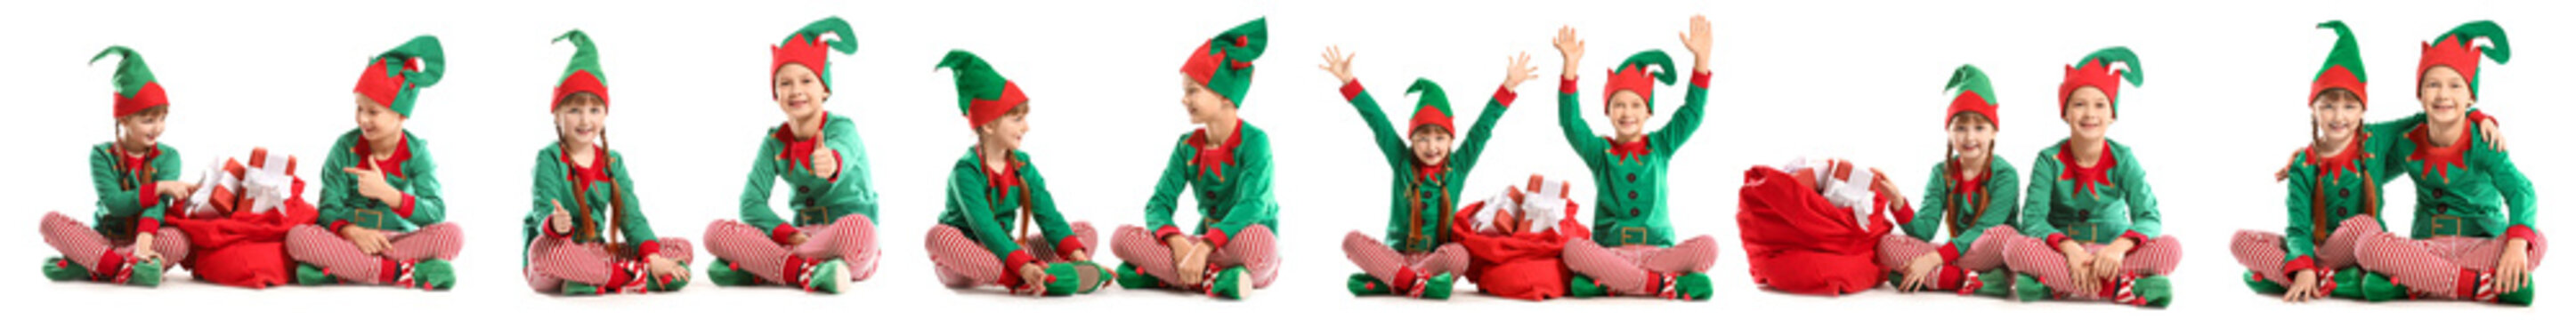 Little children in costume of elf and with Santa Claus bag full of gifts on white background